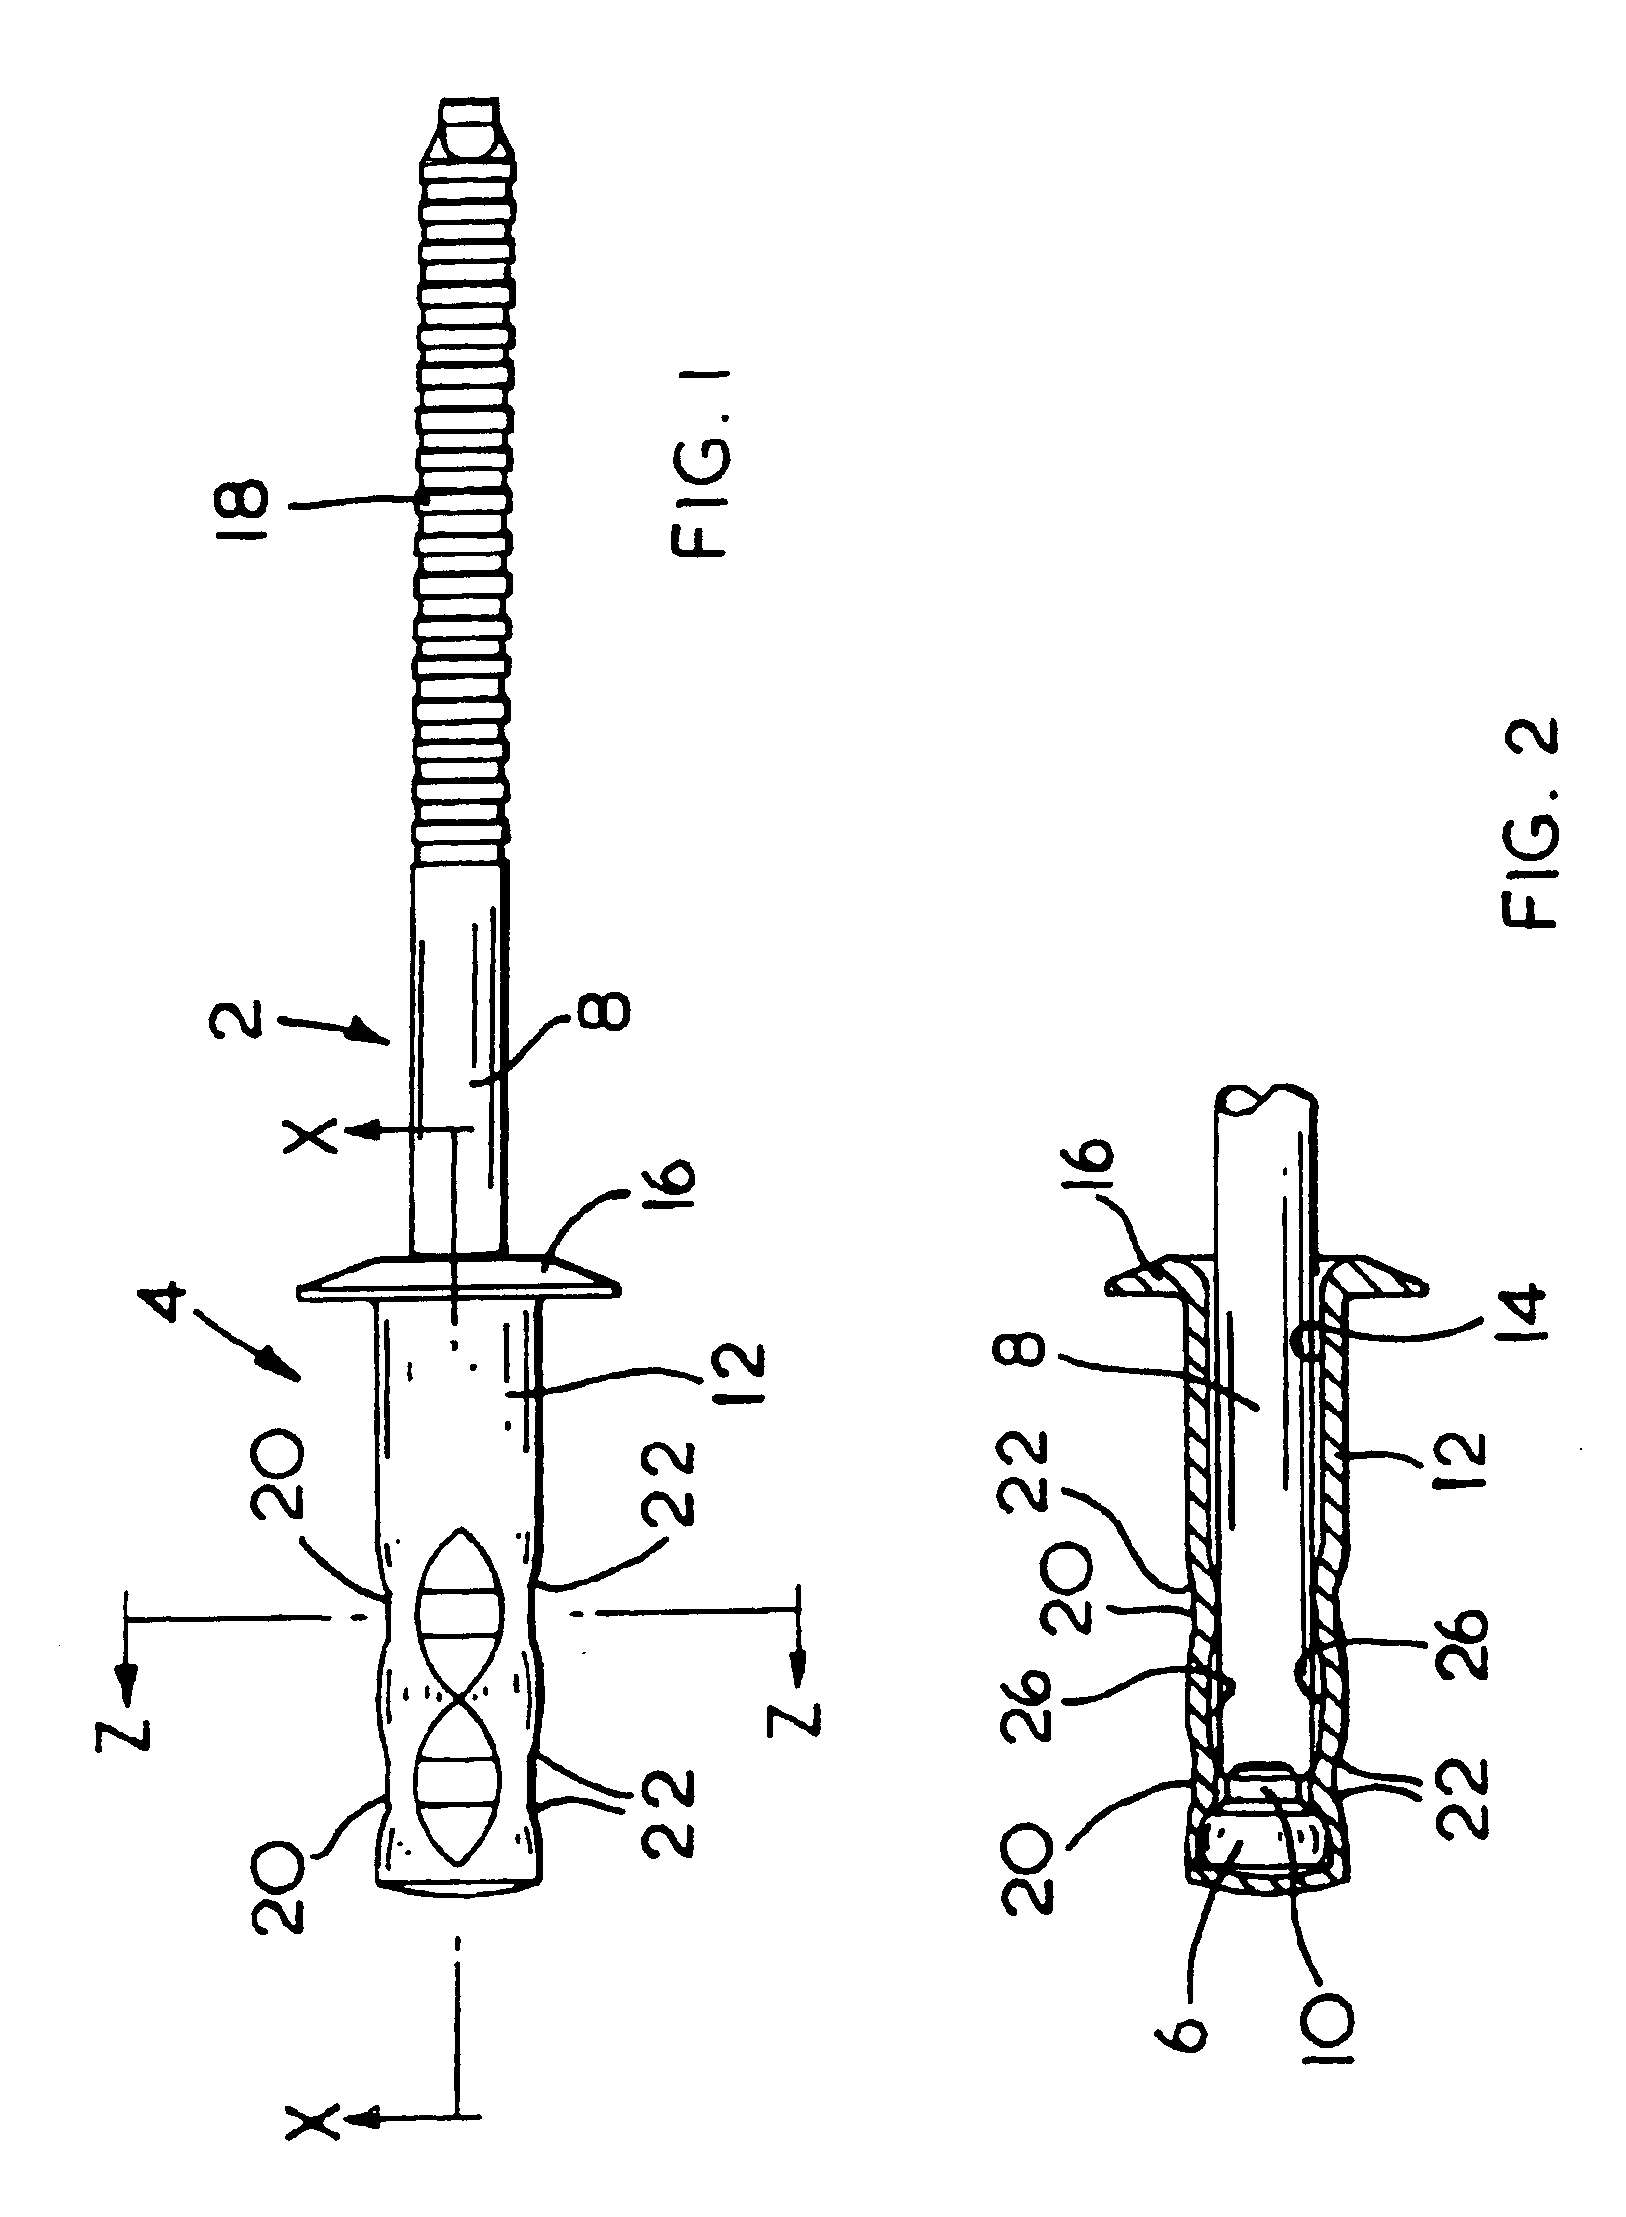 Closed-end blind rivet with a crimped shank and method of manufacture thereof